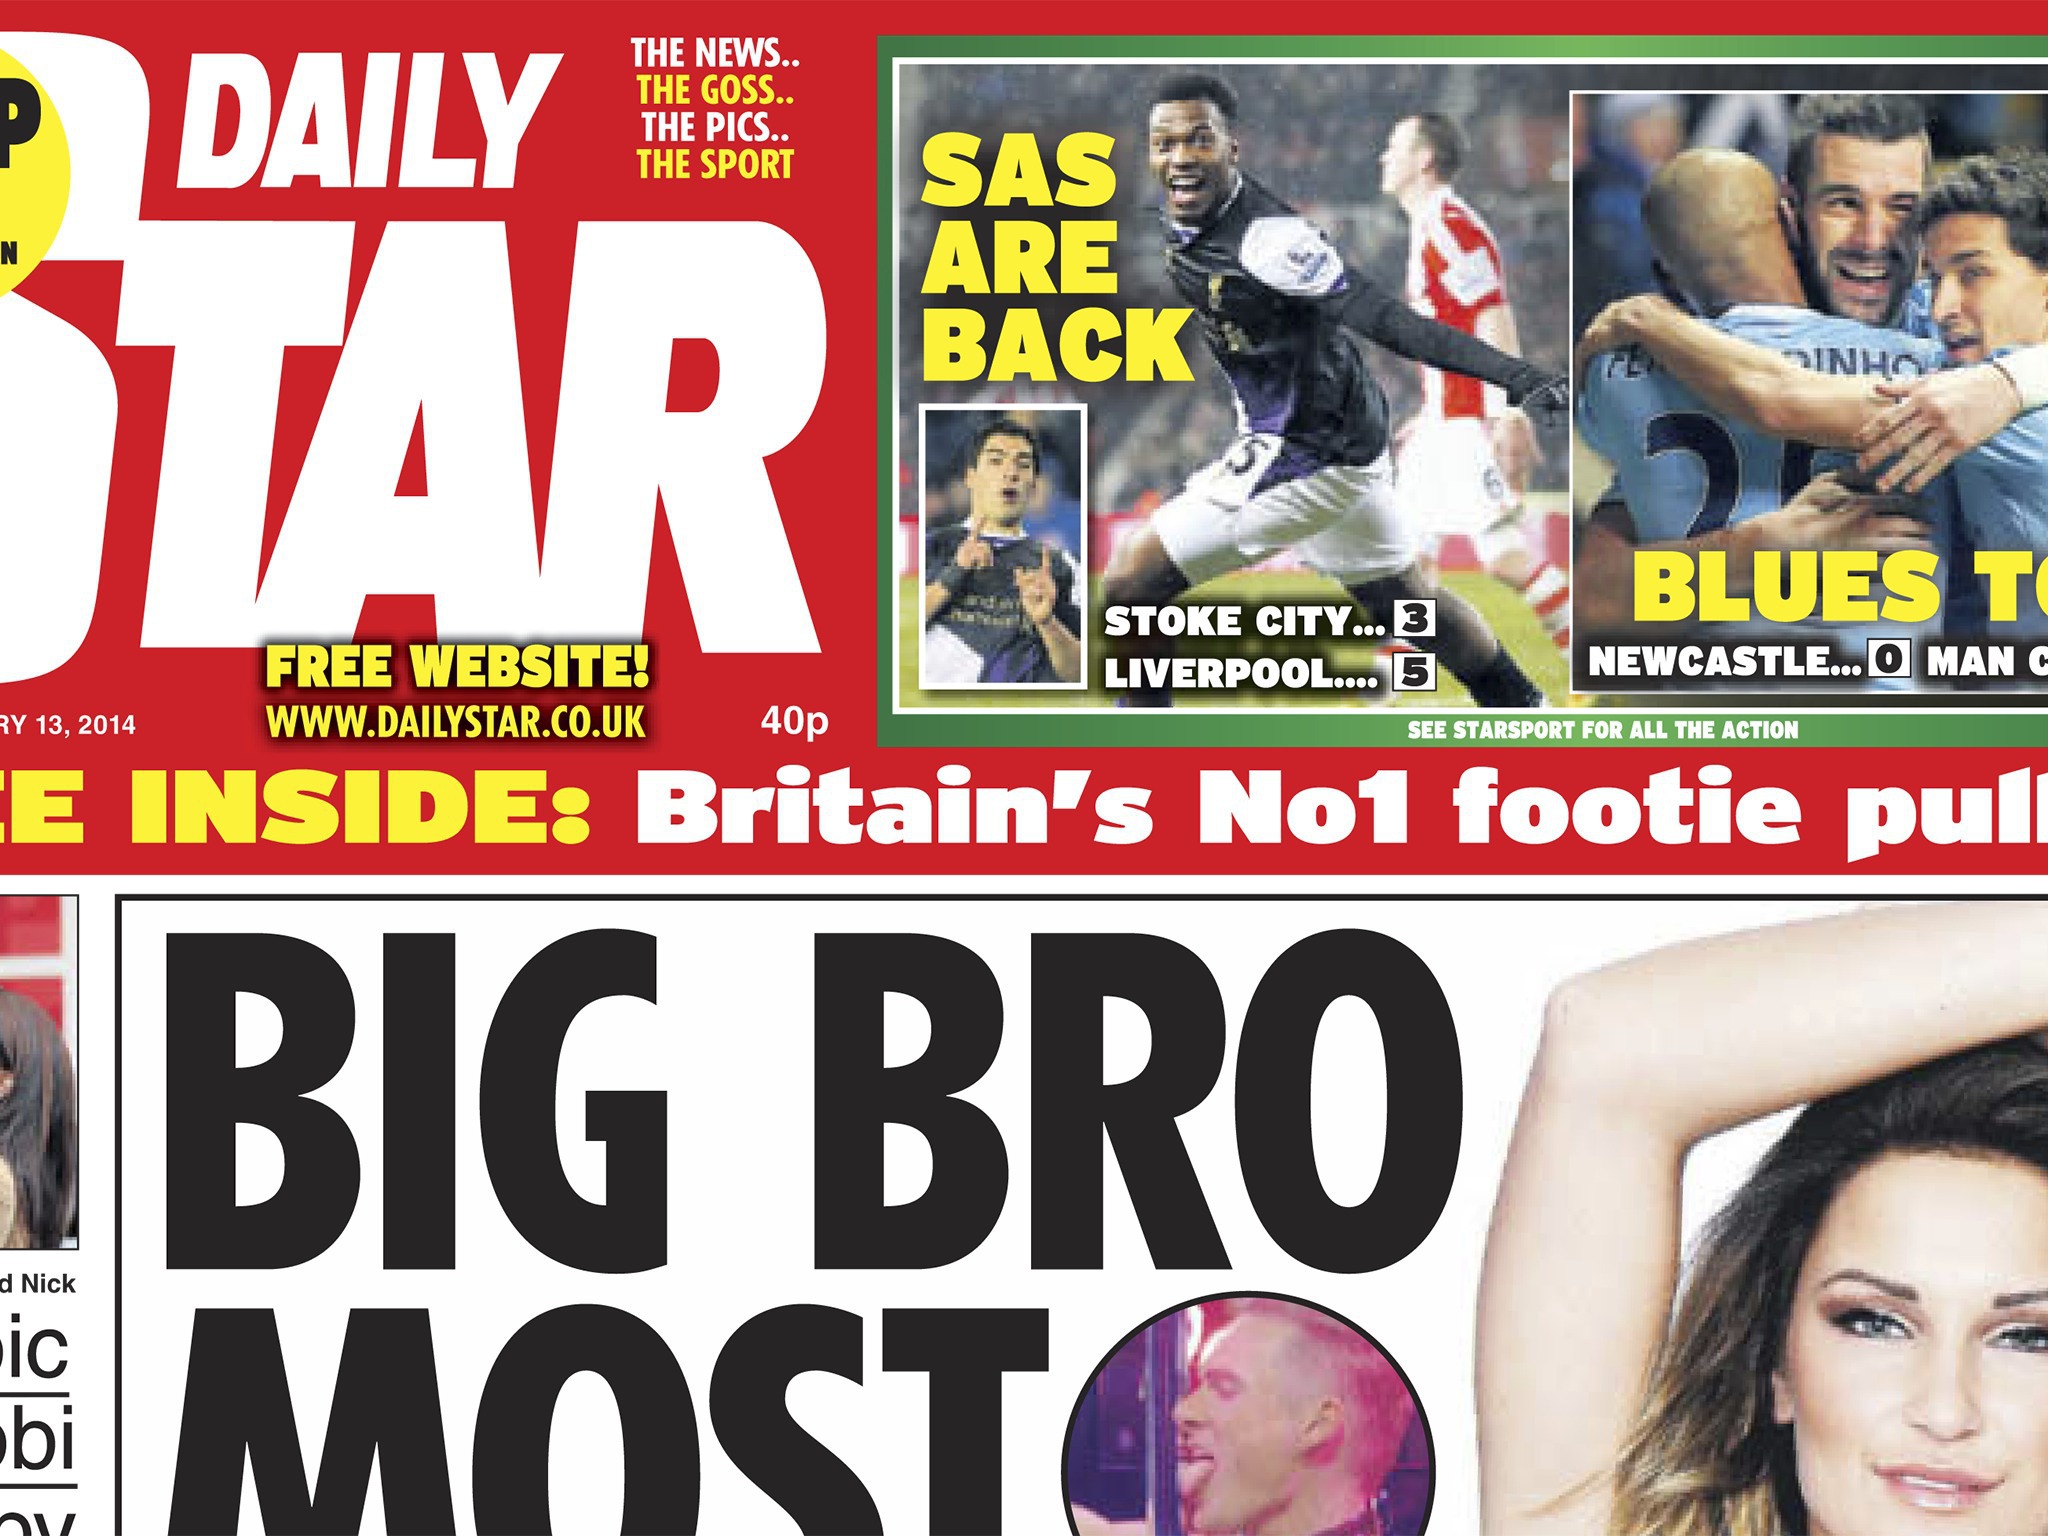 Daily Stars Faux Outrage In Reporting Celebrity Big Brothers Sexy